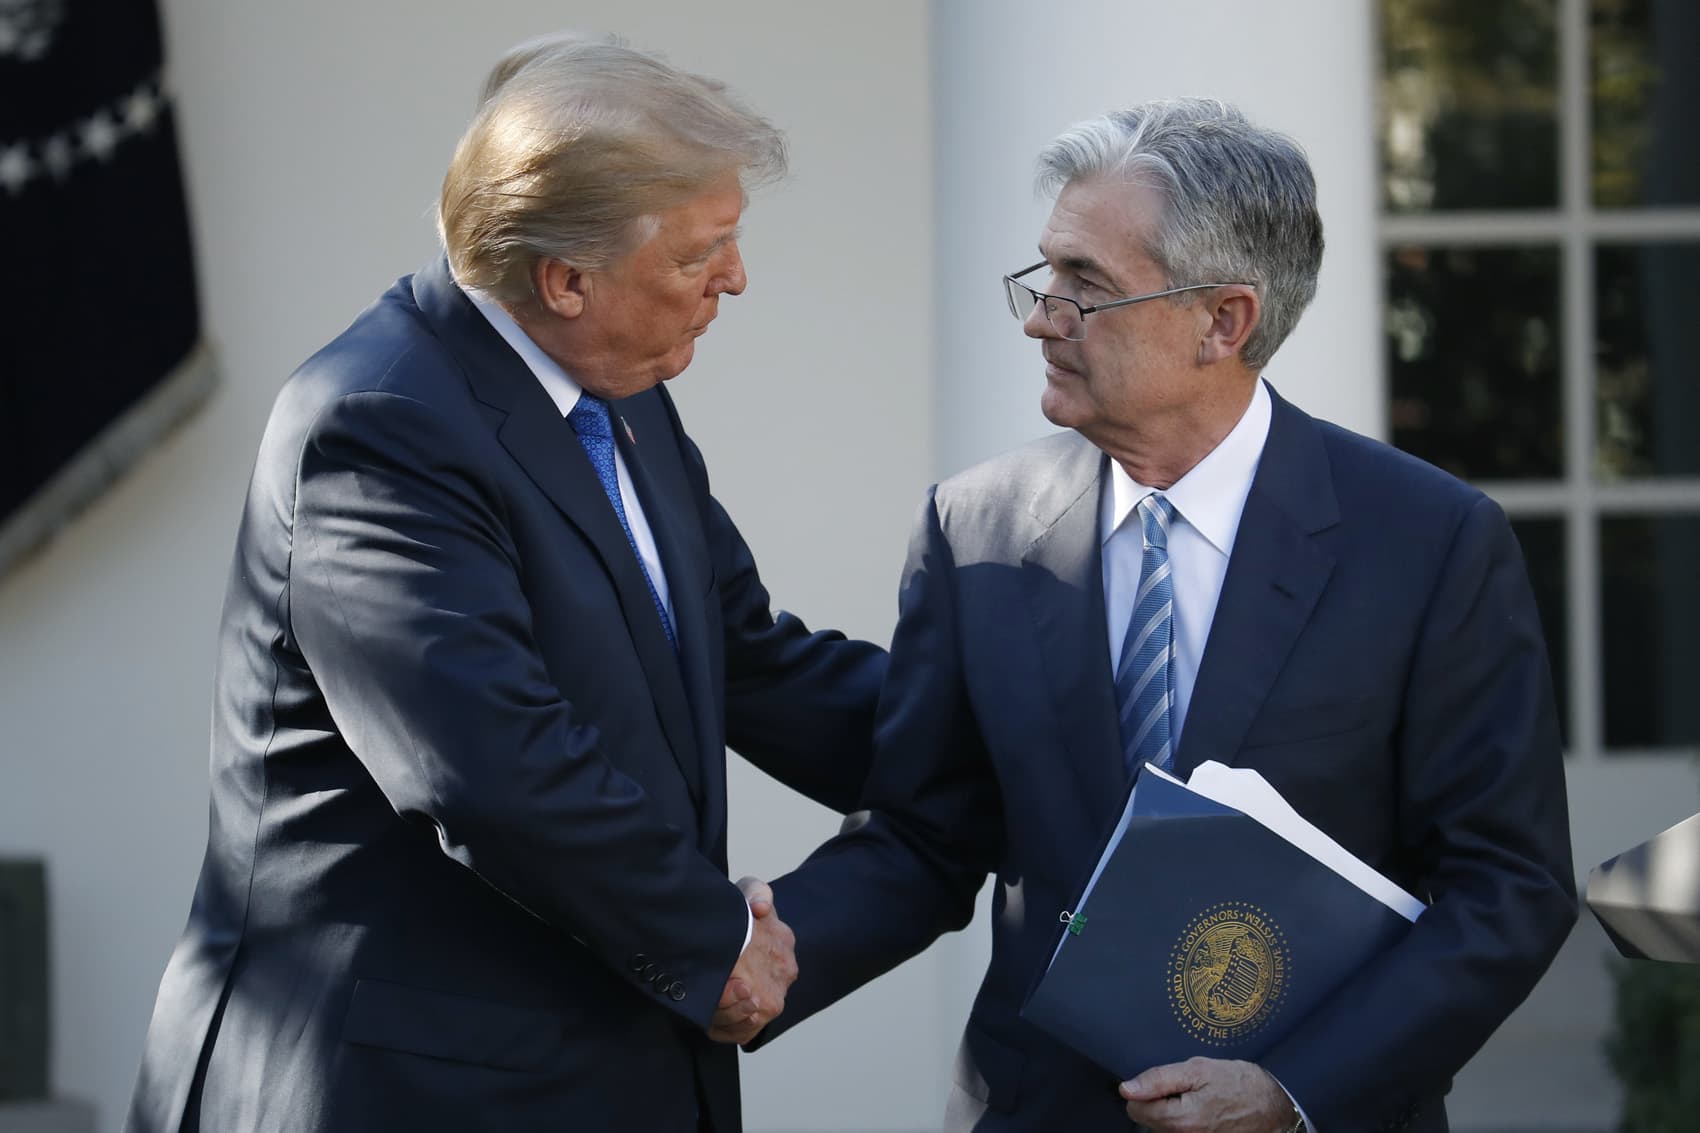 President Donald Trump shakes hands with then-Federal Reserve board member Jerome Powell after announcing him as his nominee for the next chair of the Federal Reserve, in the Rose Garden of the White House in Washington, Nov. 2, 2017. (Alex Brandon, File/AP)